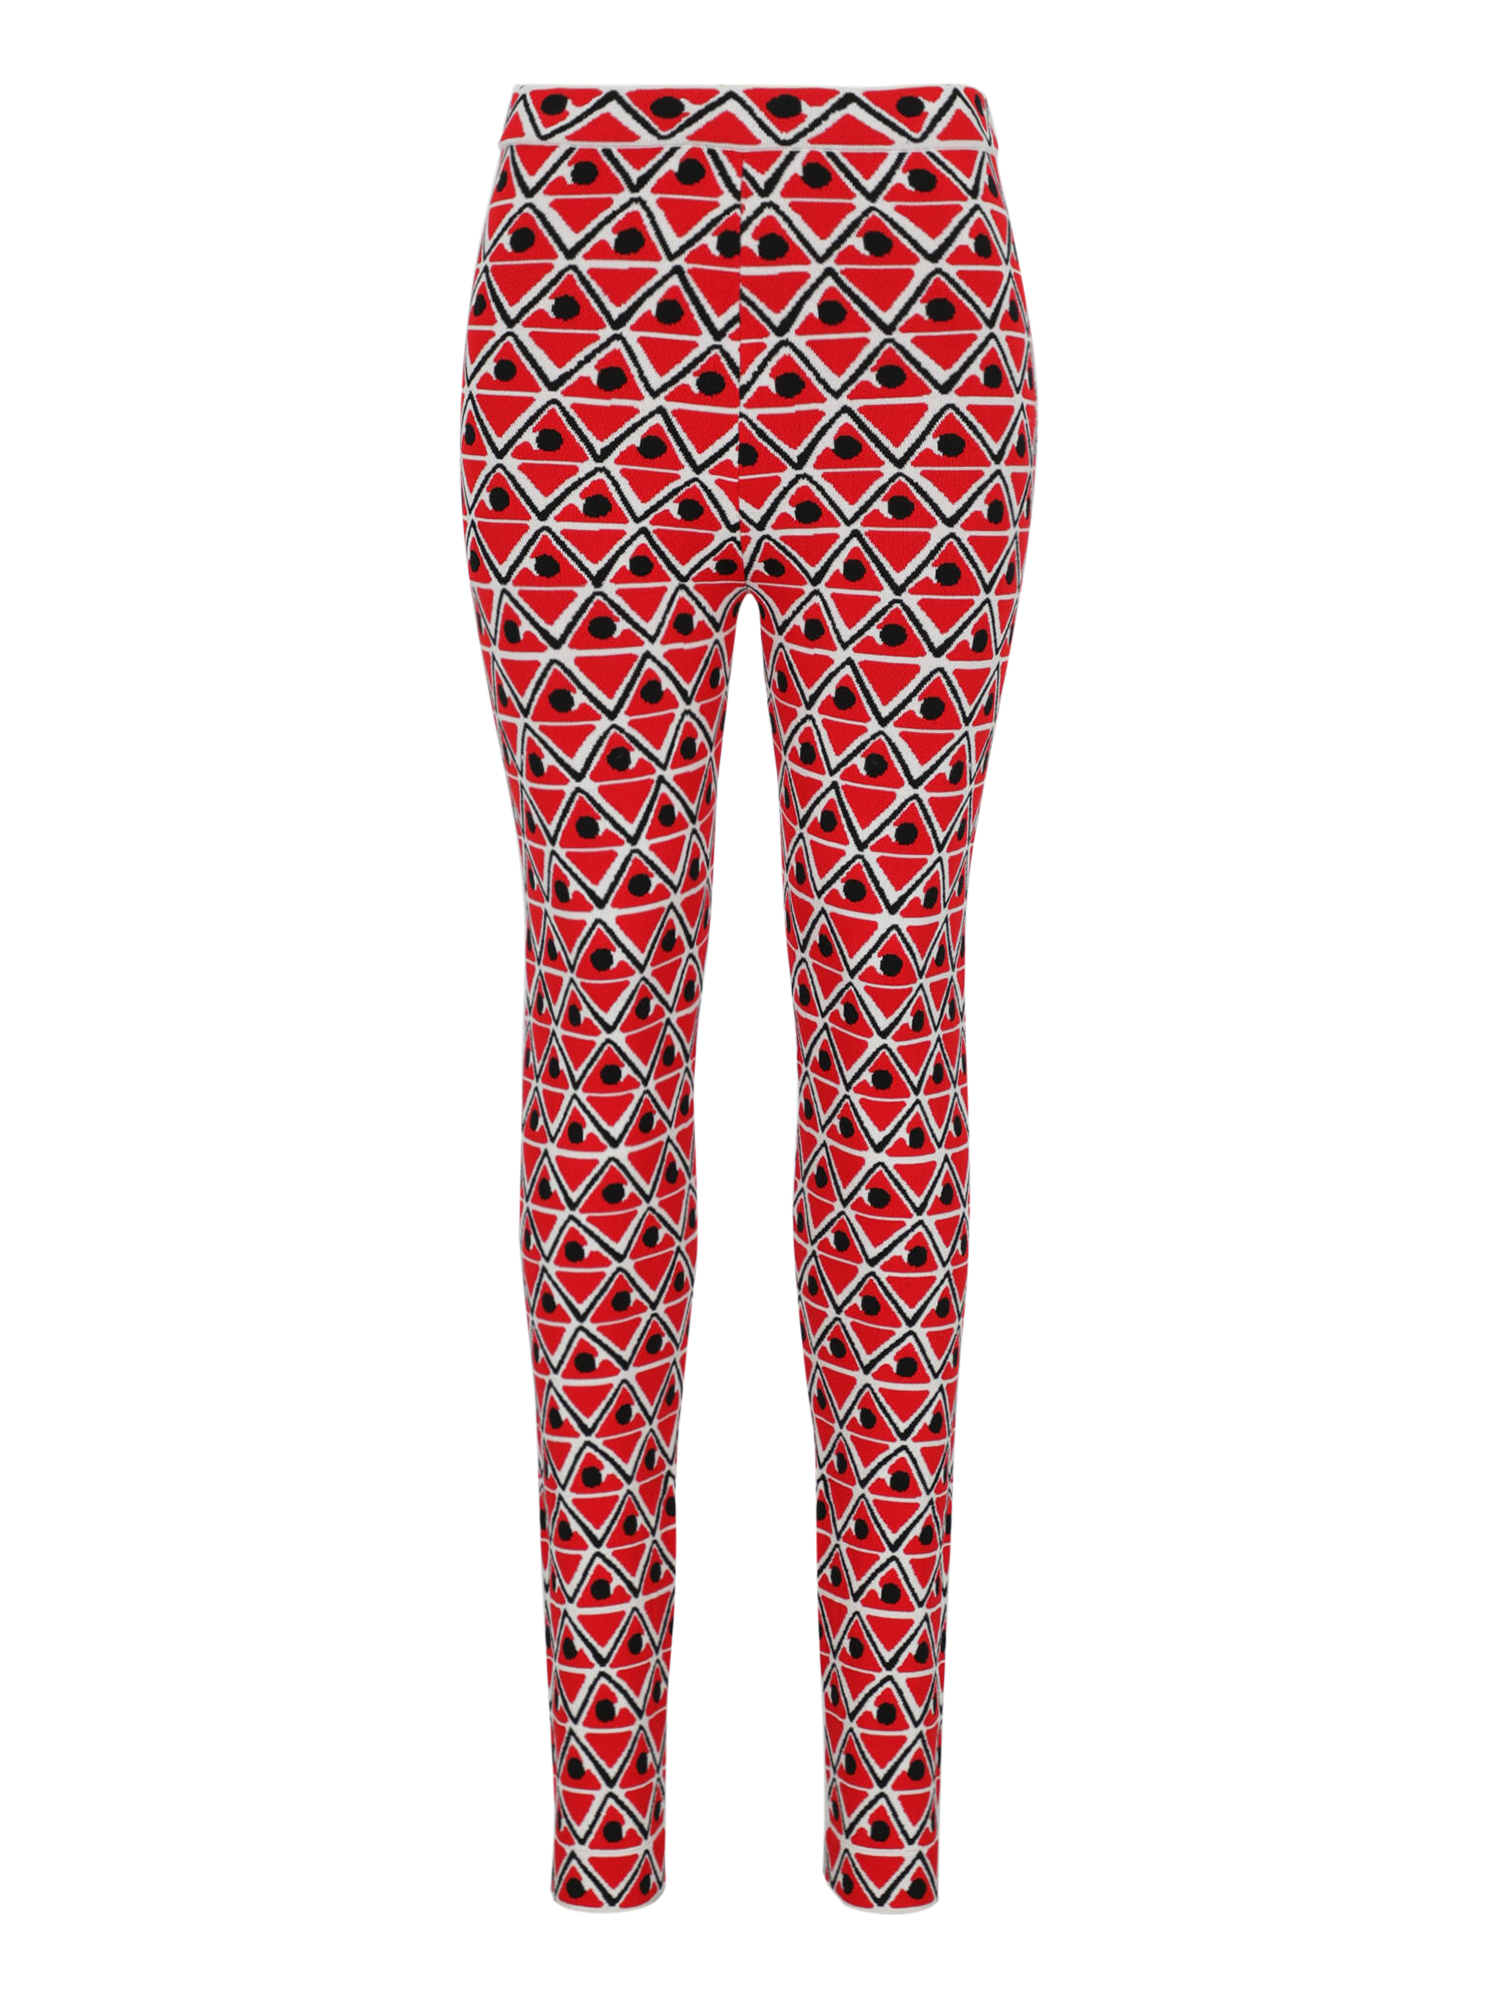 Women's Trousers - Moncler - In Black, Red, White Synthetic Fibers